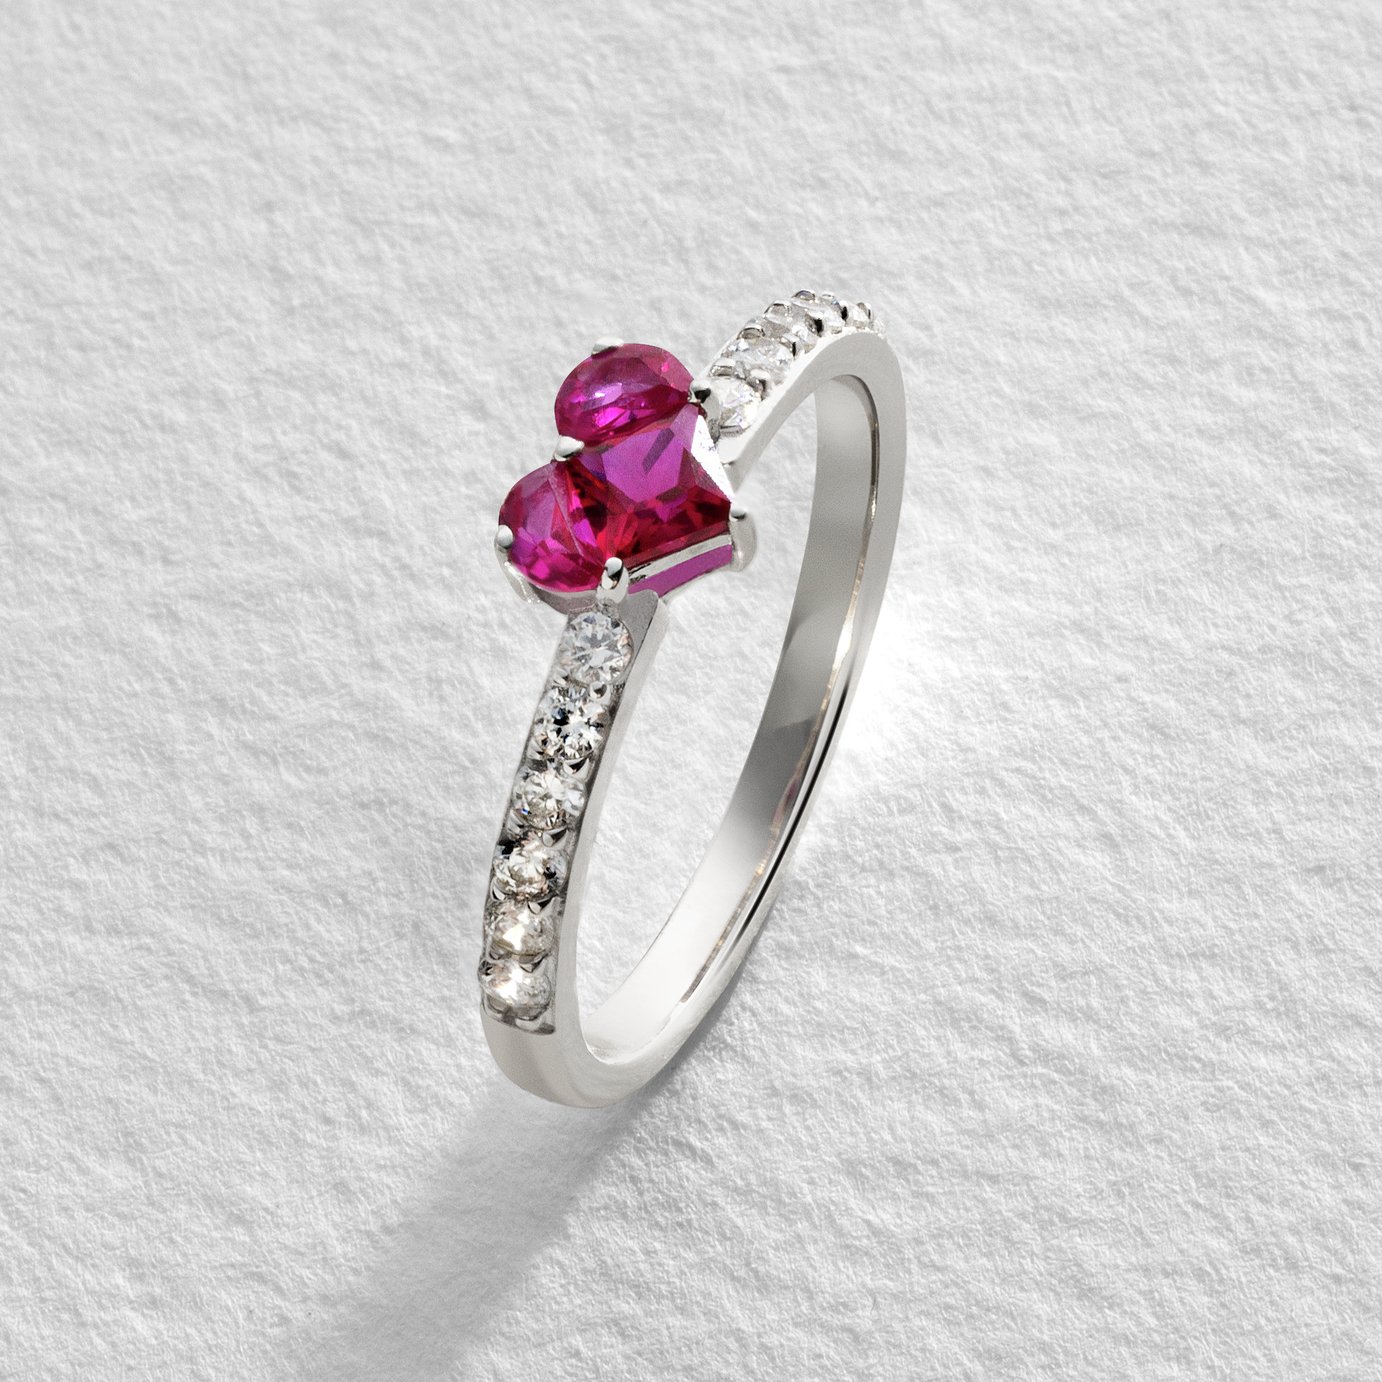 Revere Sterling Silver Cubic Zirconia Ruby Heart Ring - Q